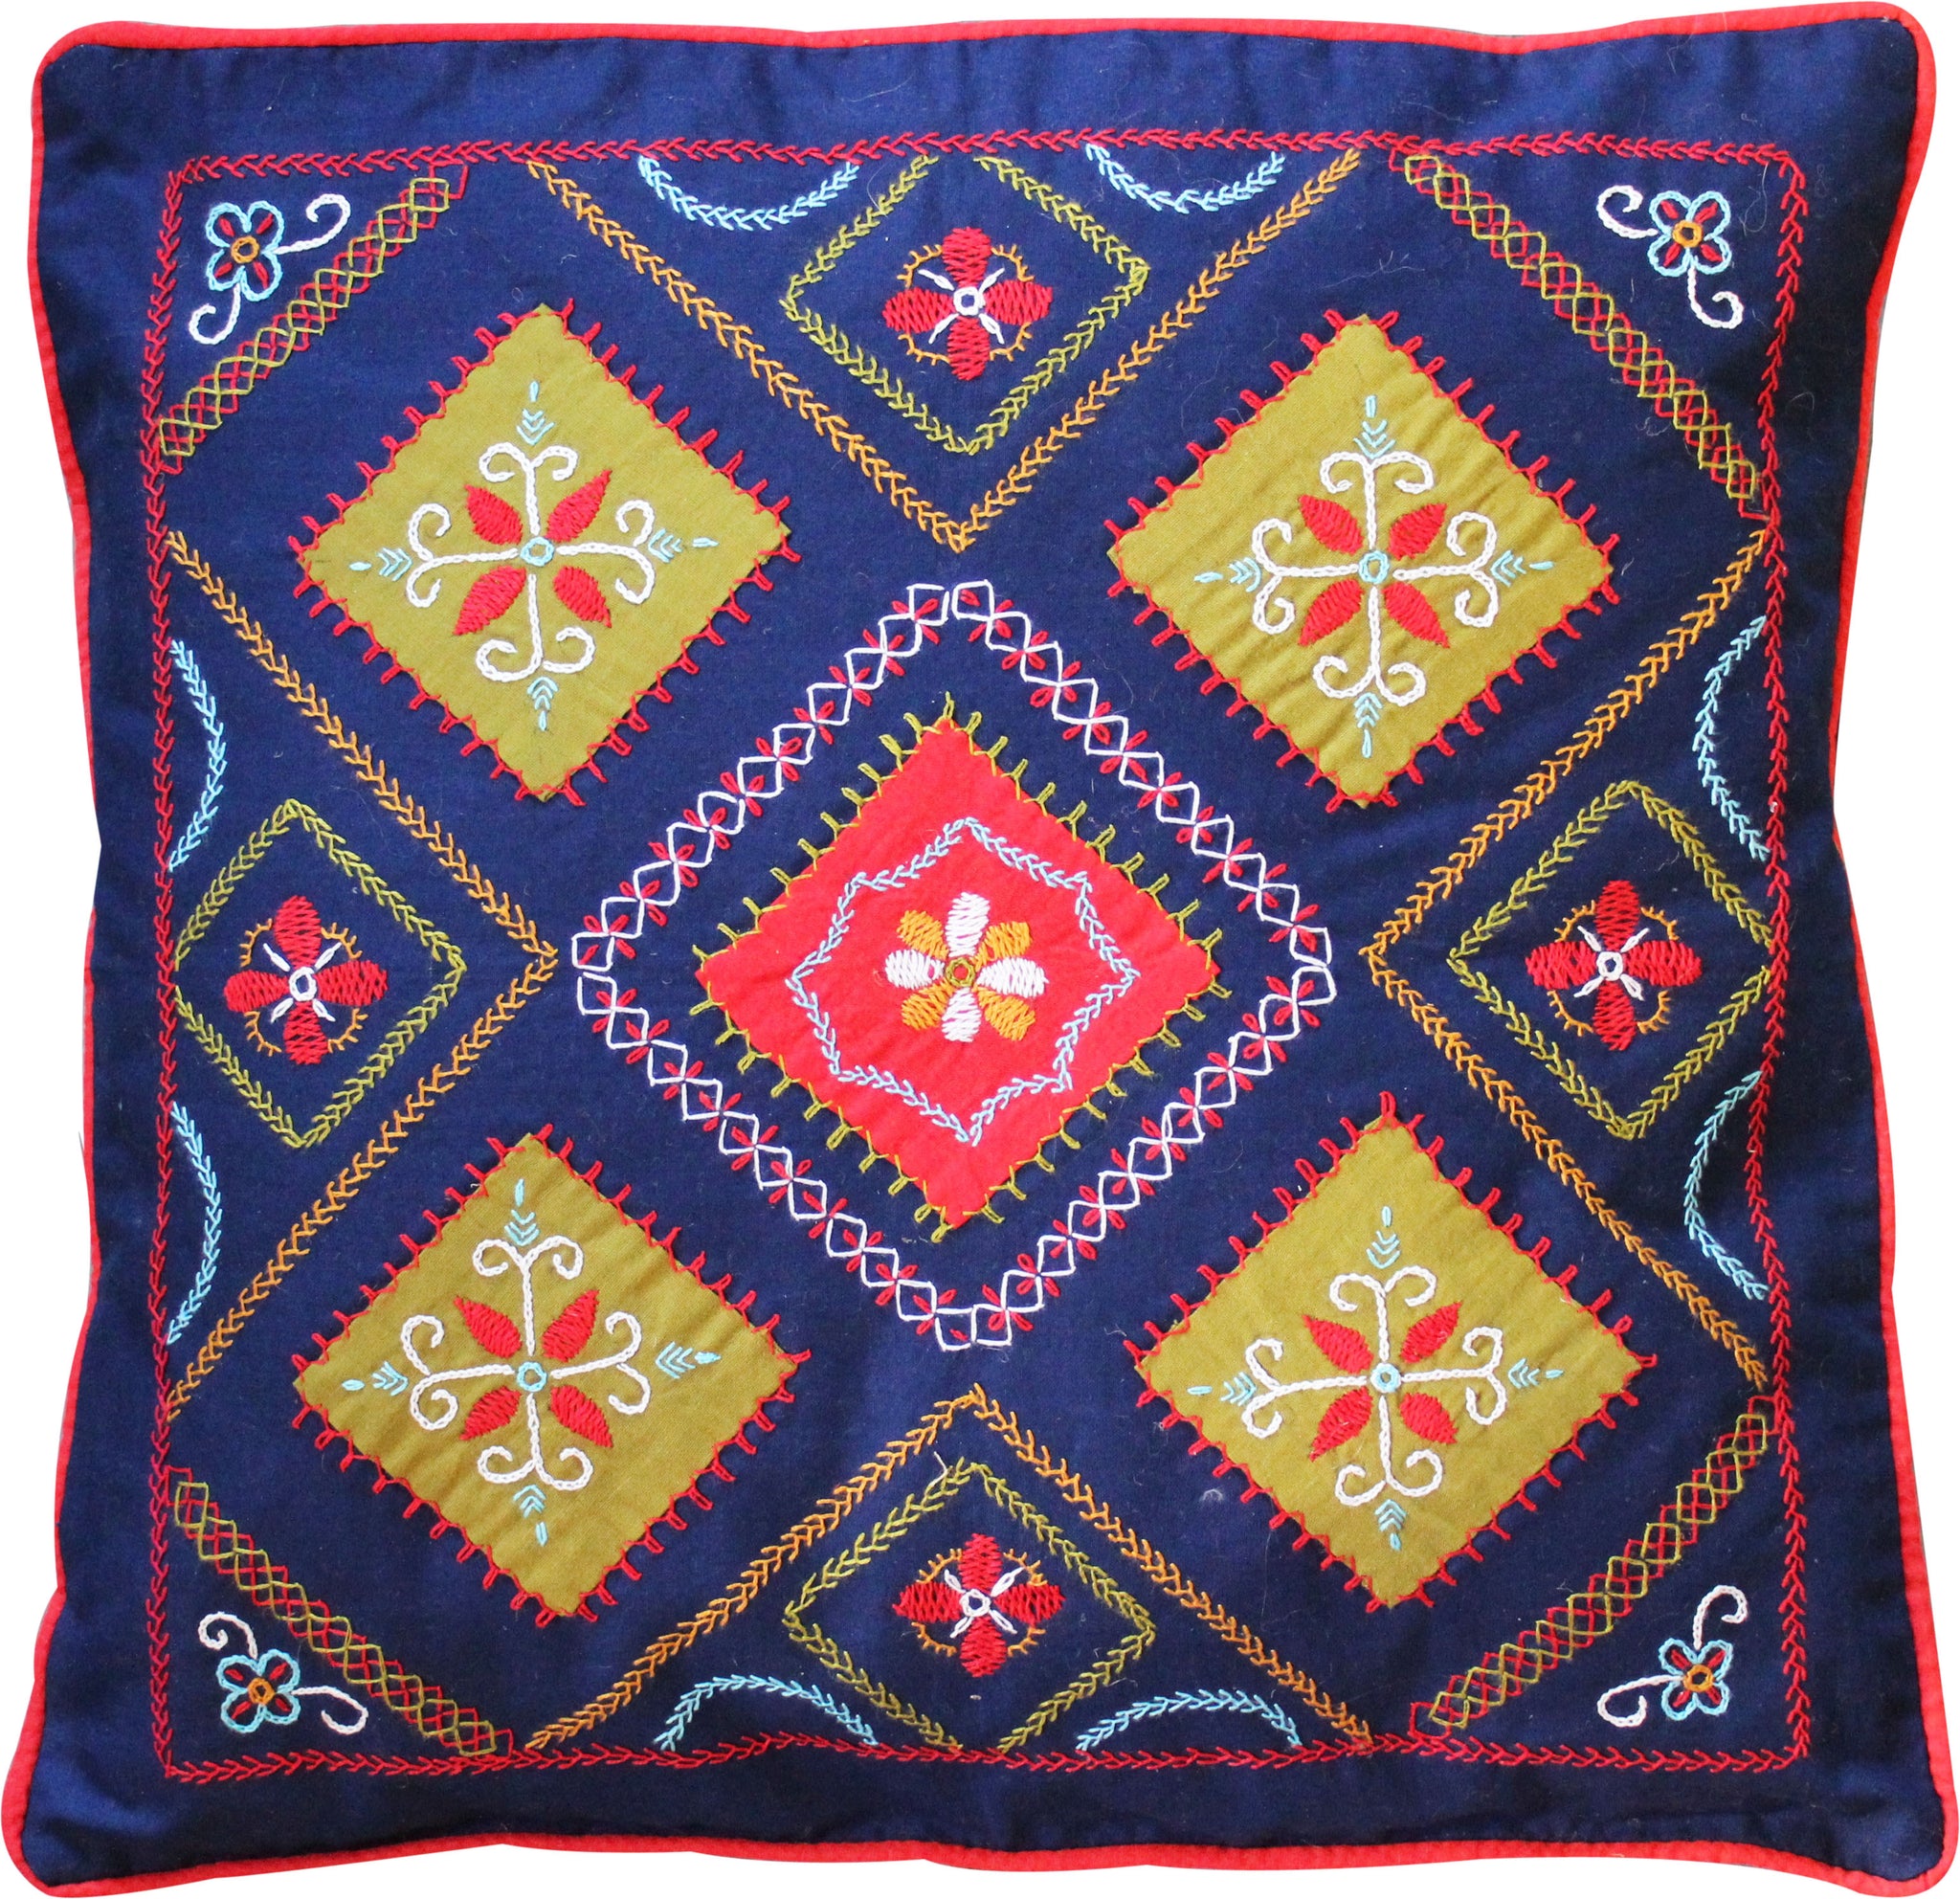 Cushion cover - hand-embroidered